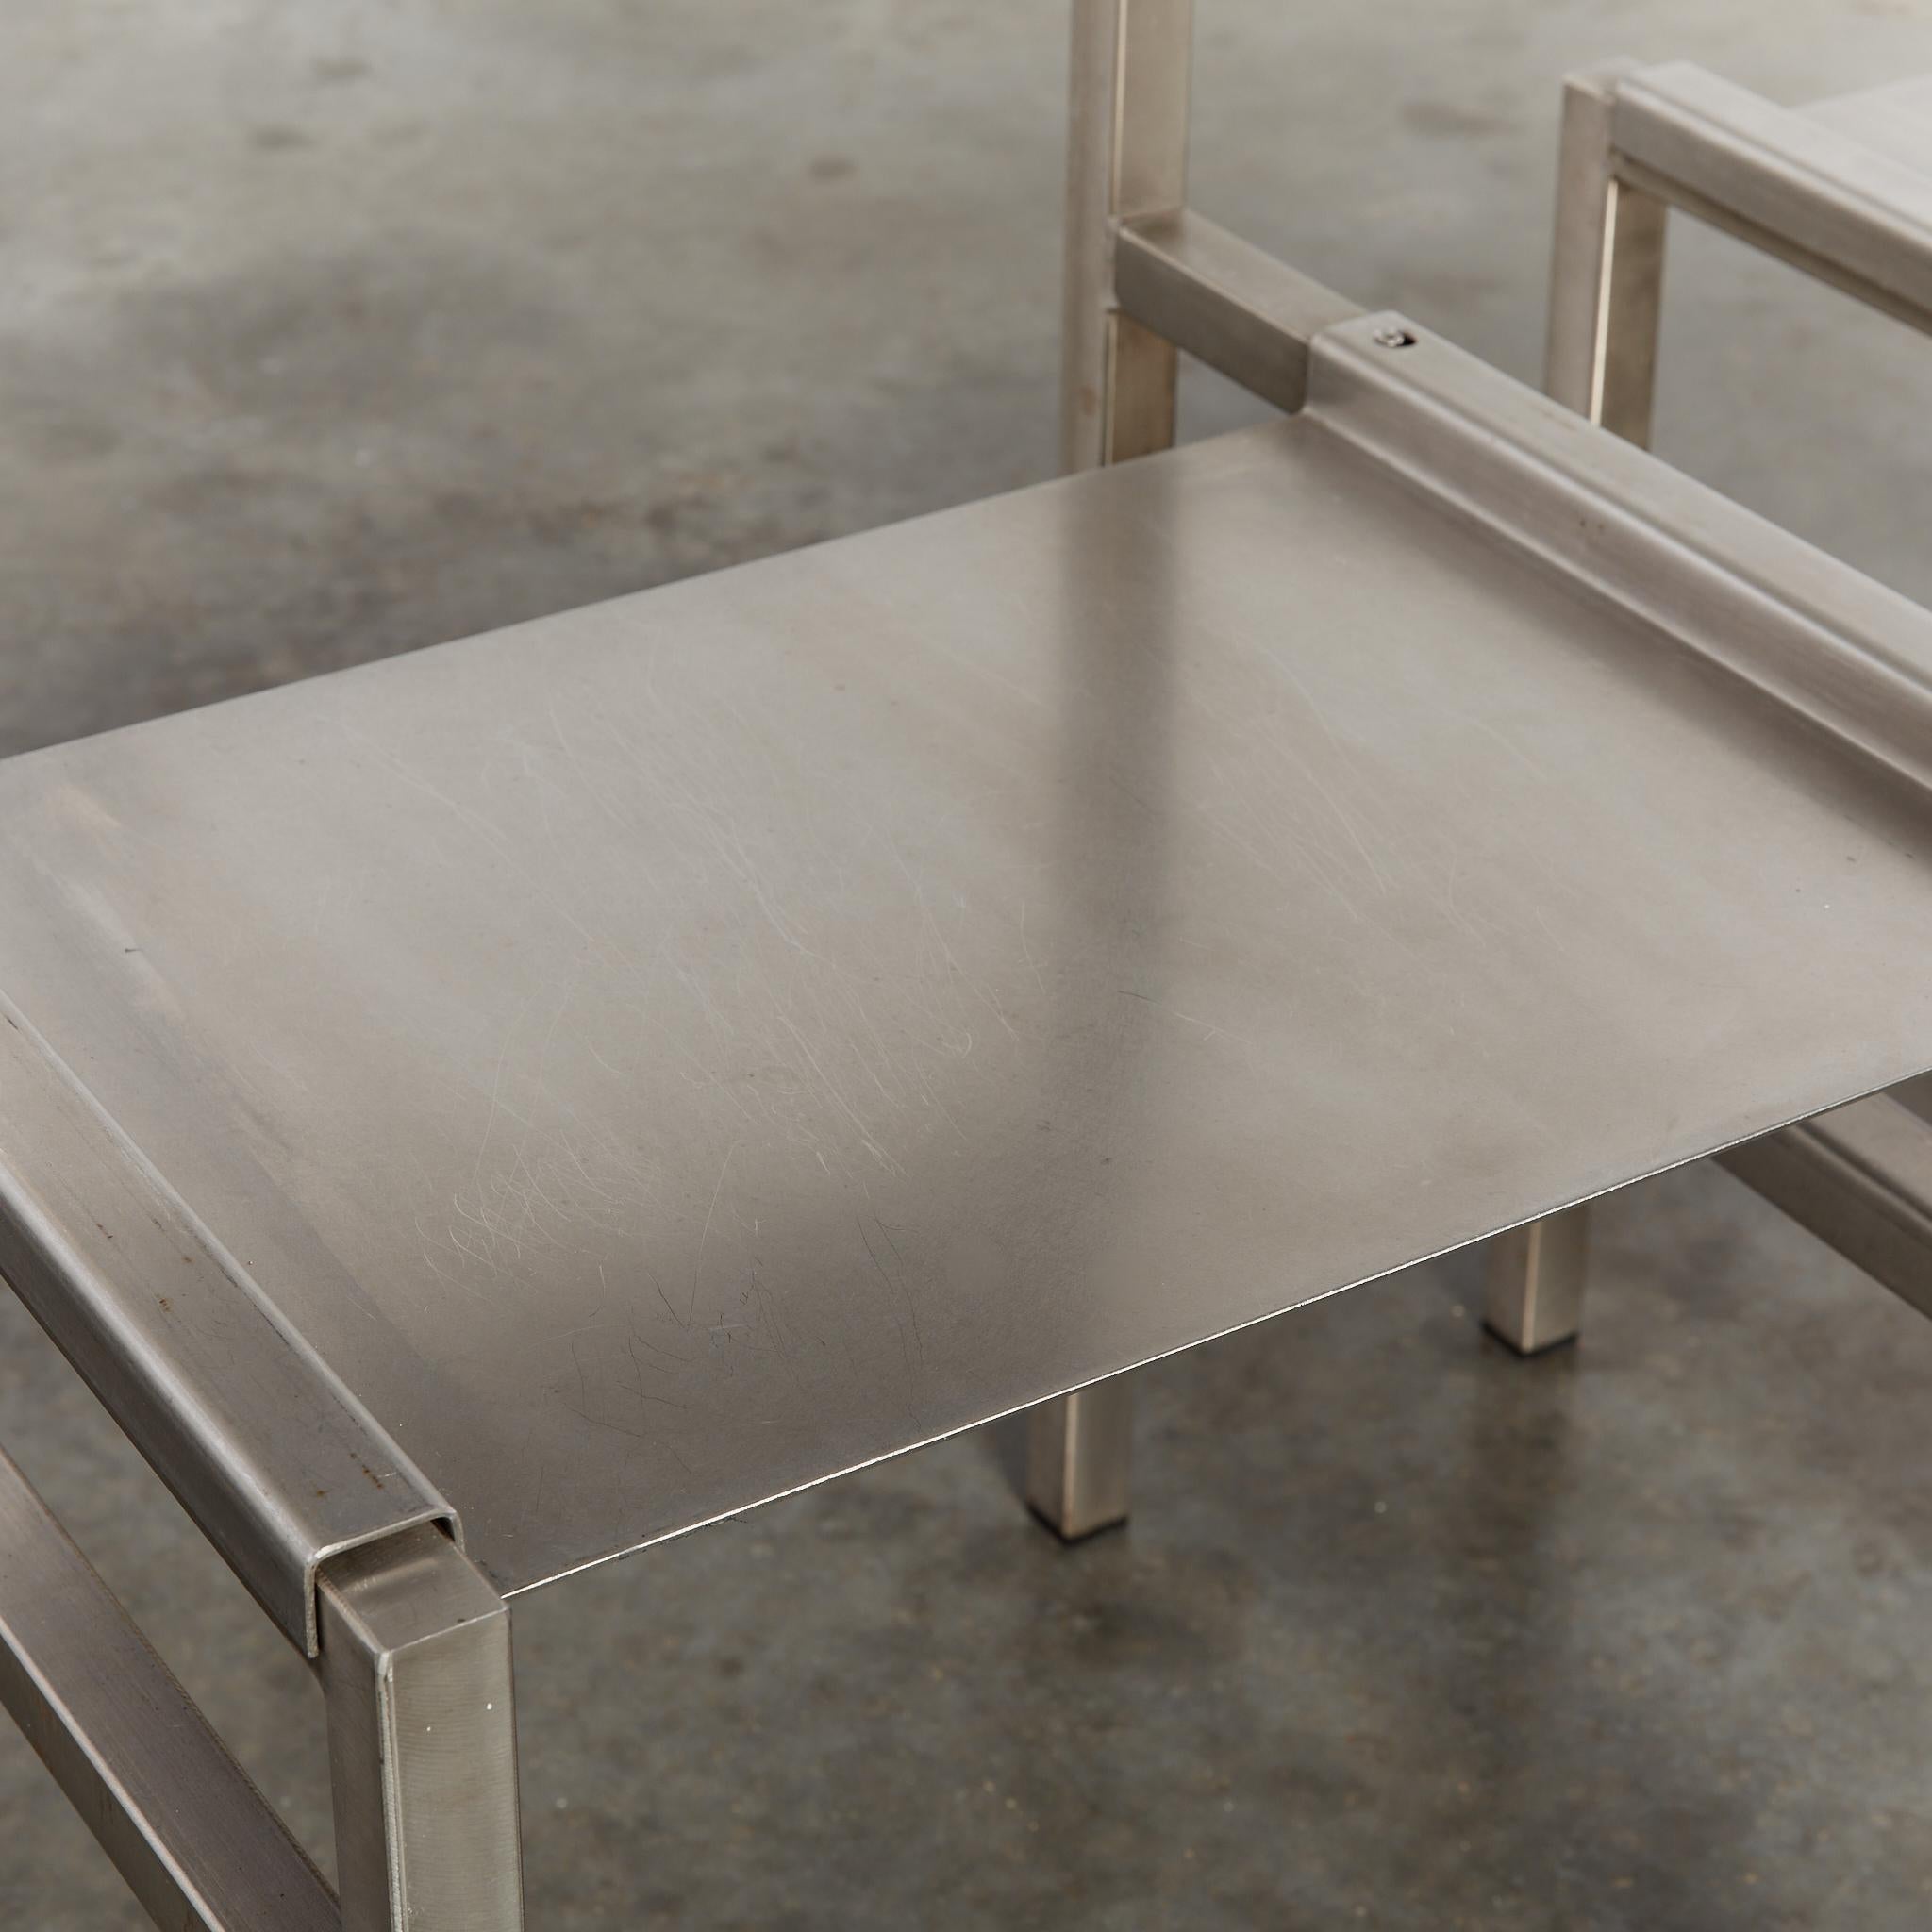 Stainless steel post modern Plug-in loveseat by Christop Siebrasse, edition of 6 For Sale 13